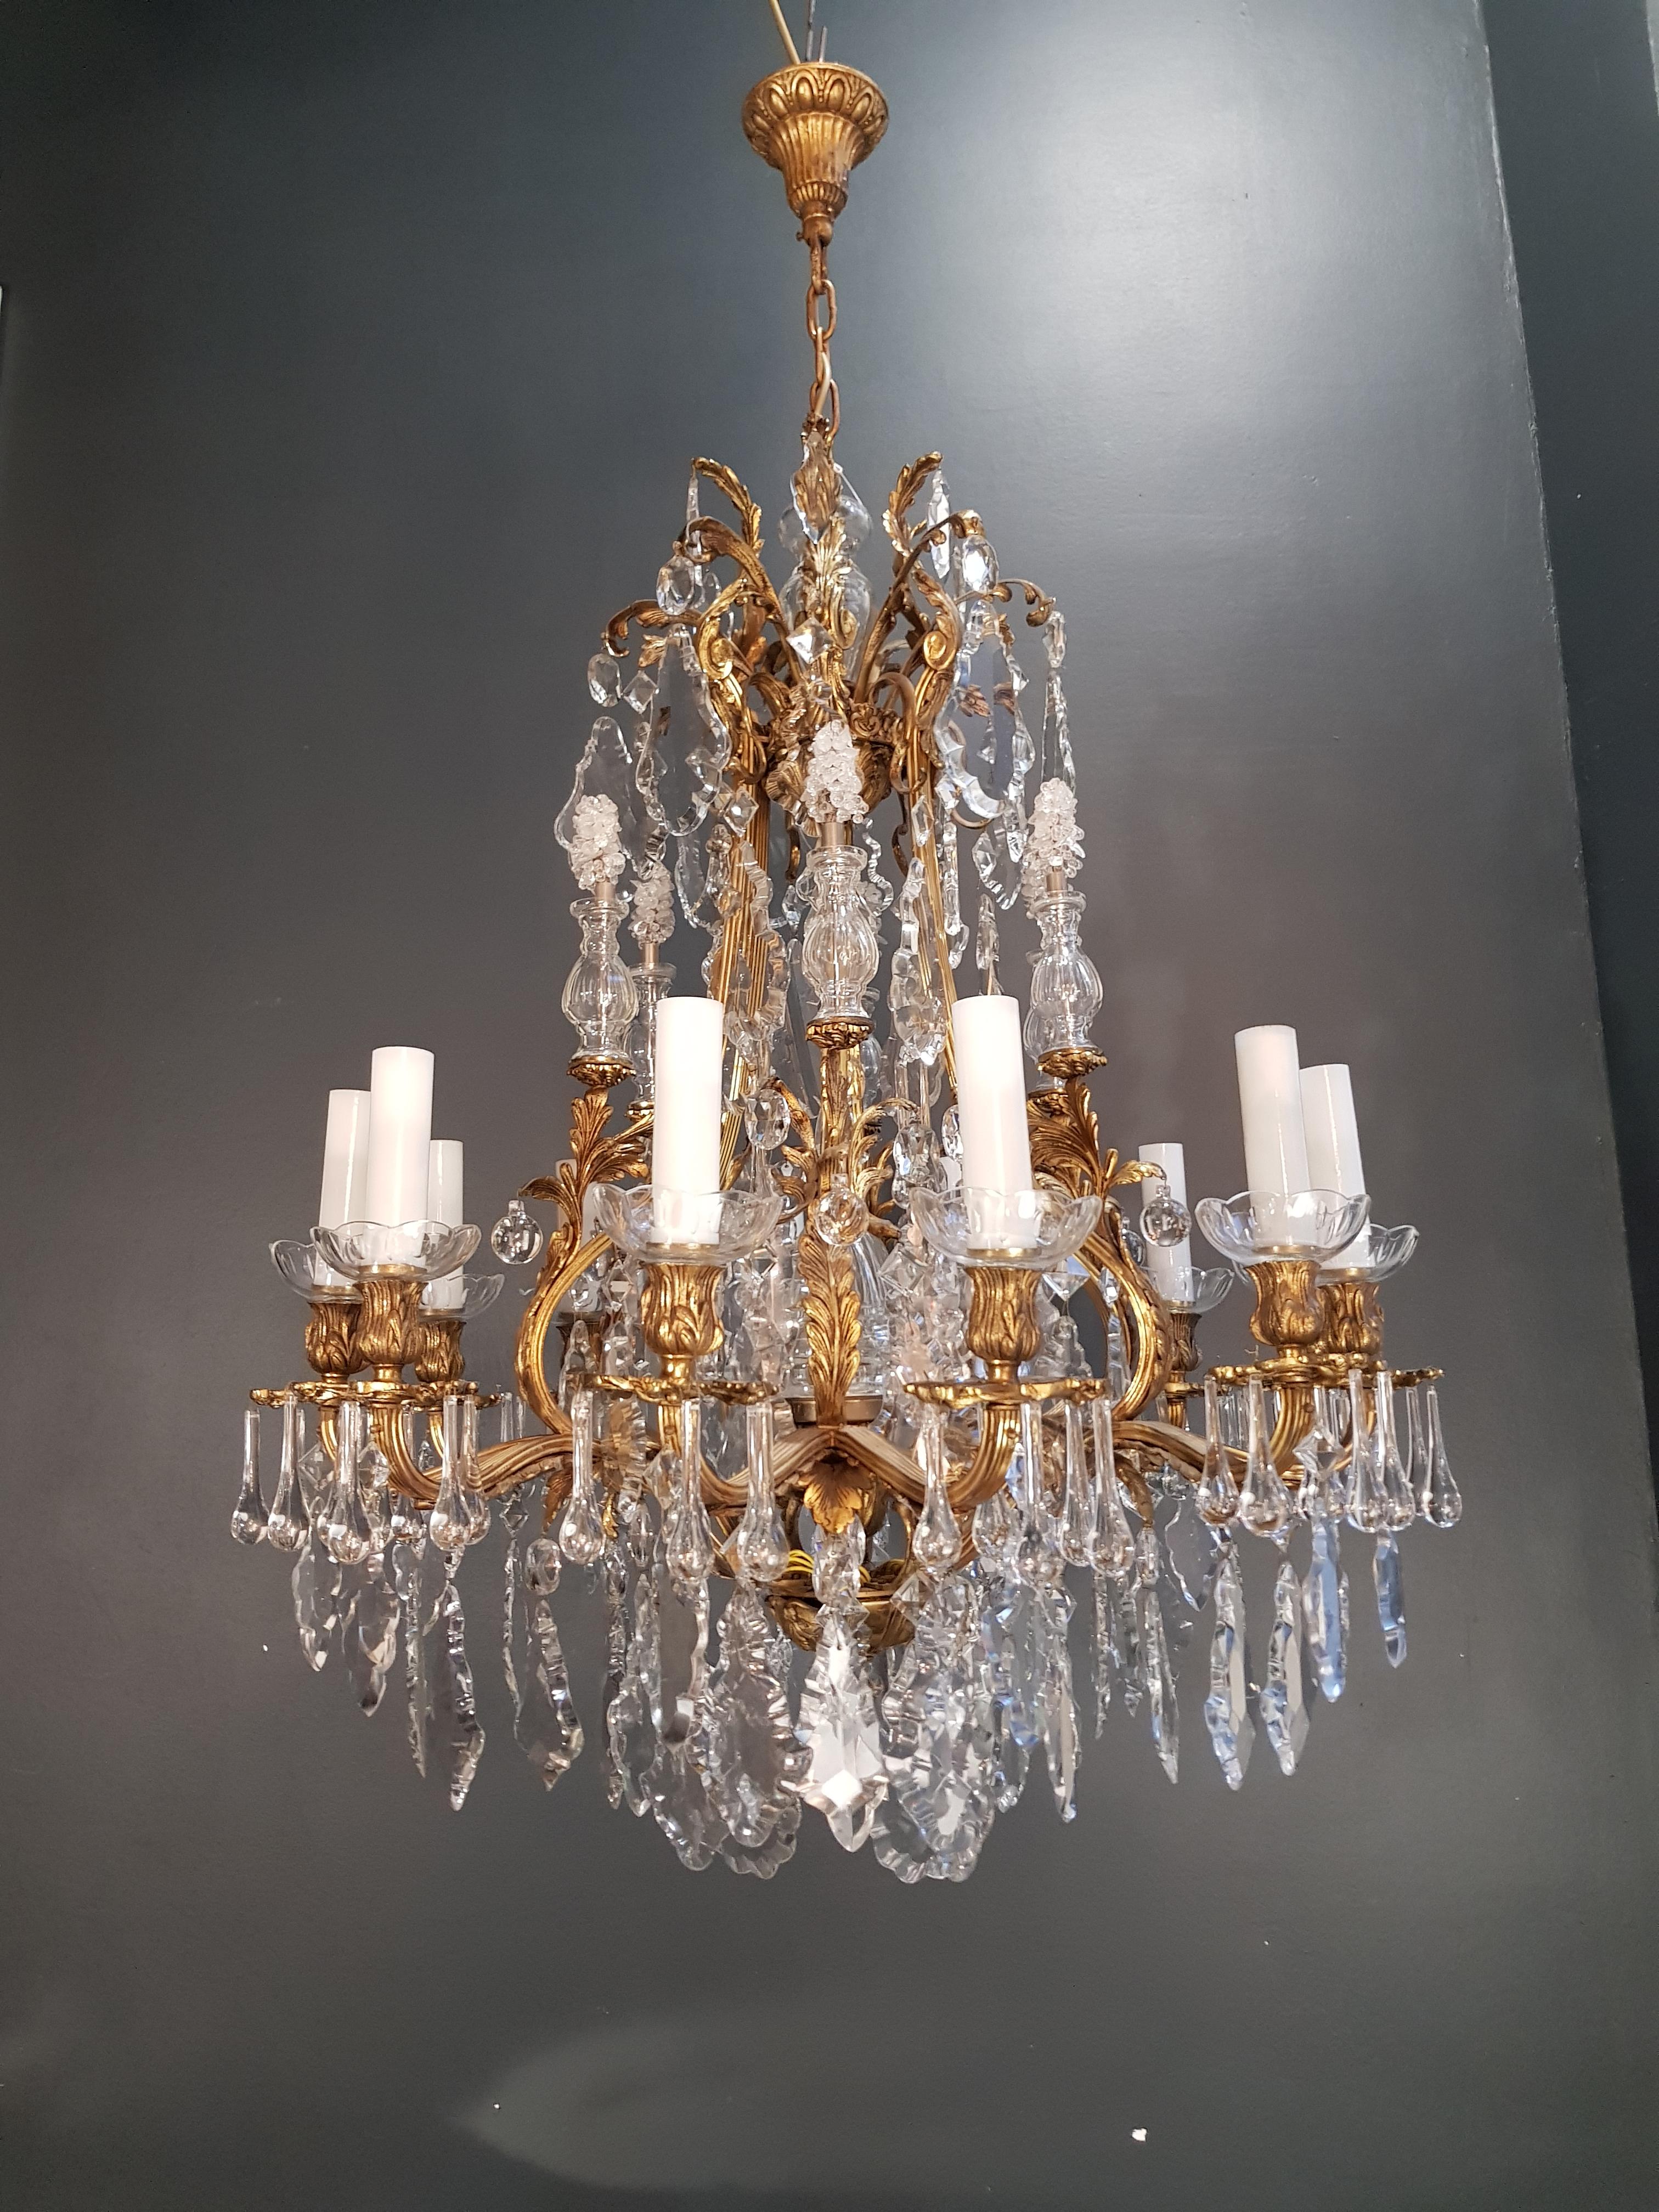 old chandelier with love and professionally restored in Berlin. electrical wiring works in the US.
Re-wired and ready to hang
not one missing
Cabling completely renewed. Crystal, hand-knotted.
Measures: Total height 130 cm, height without chain 90